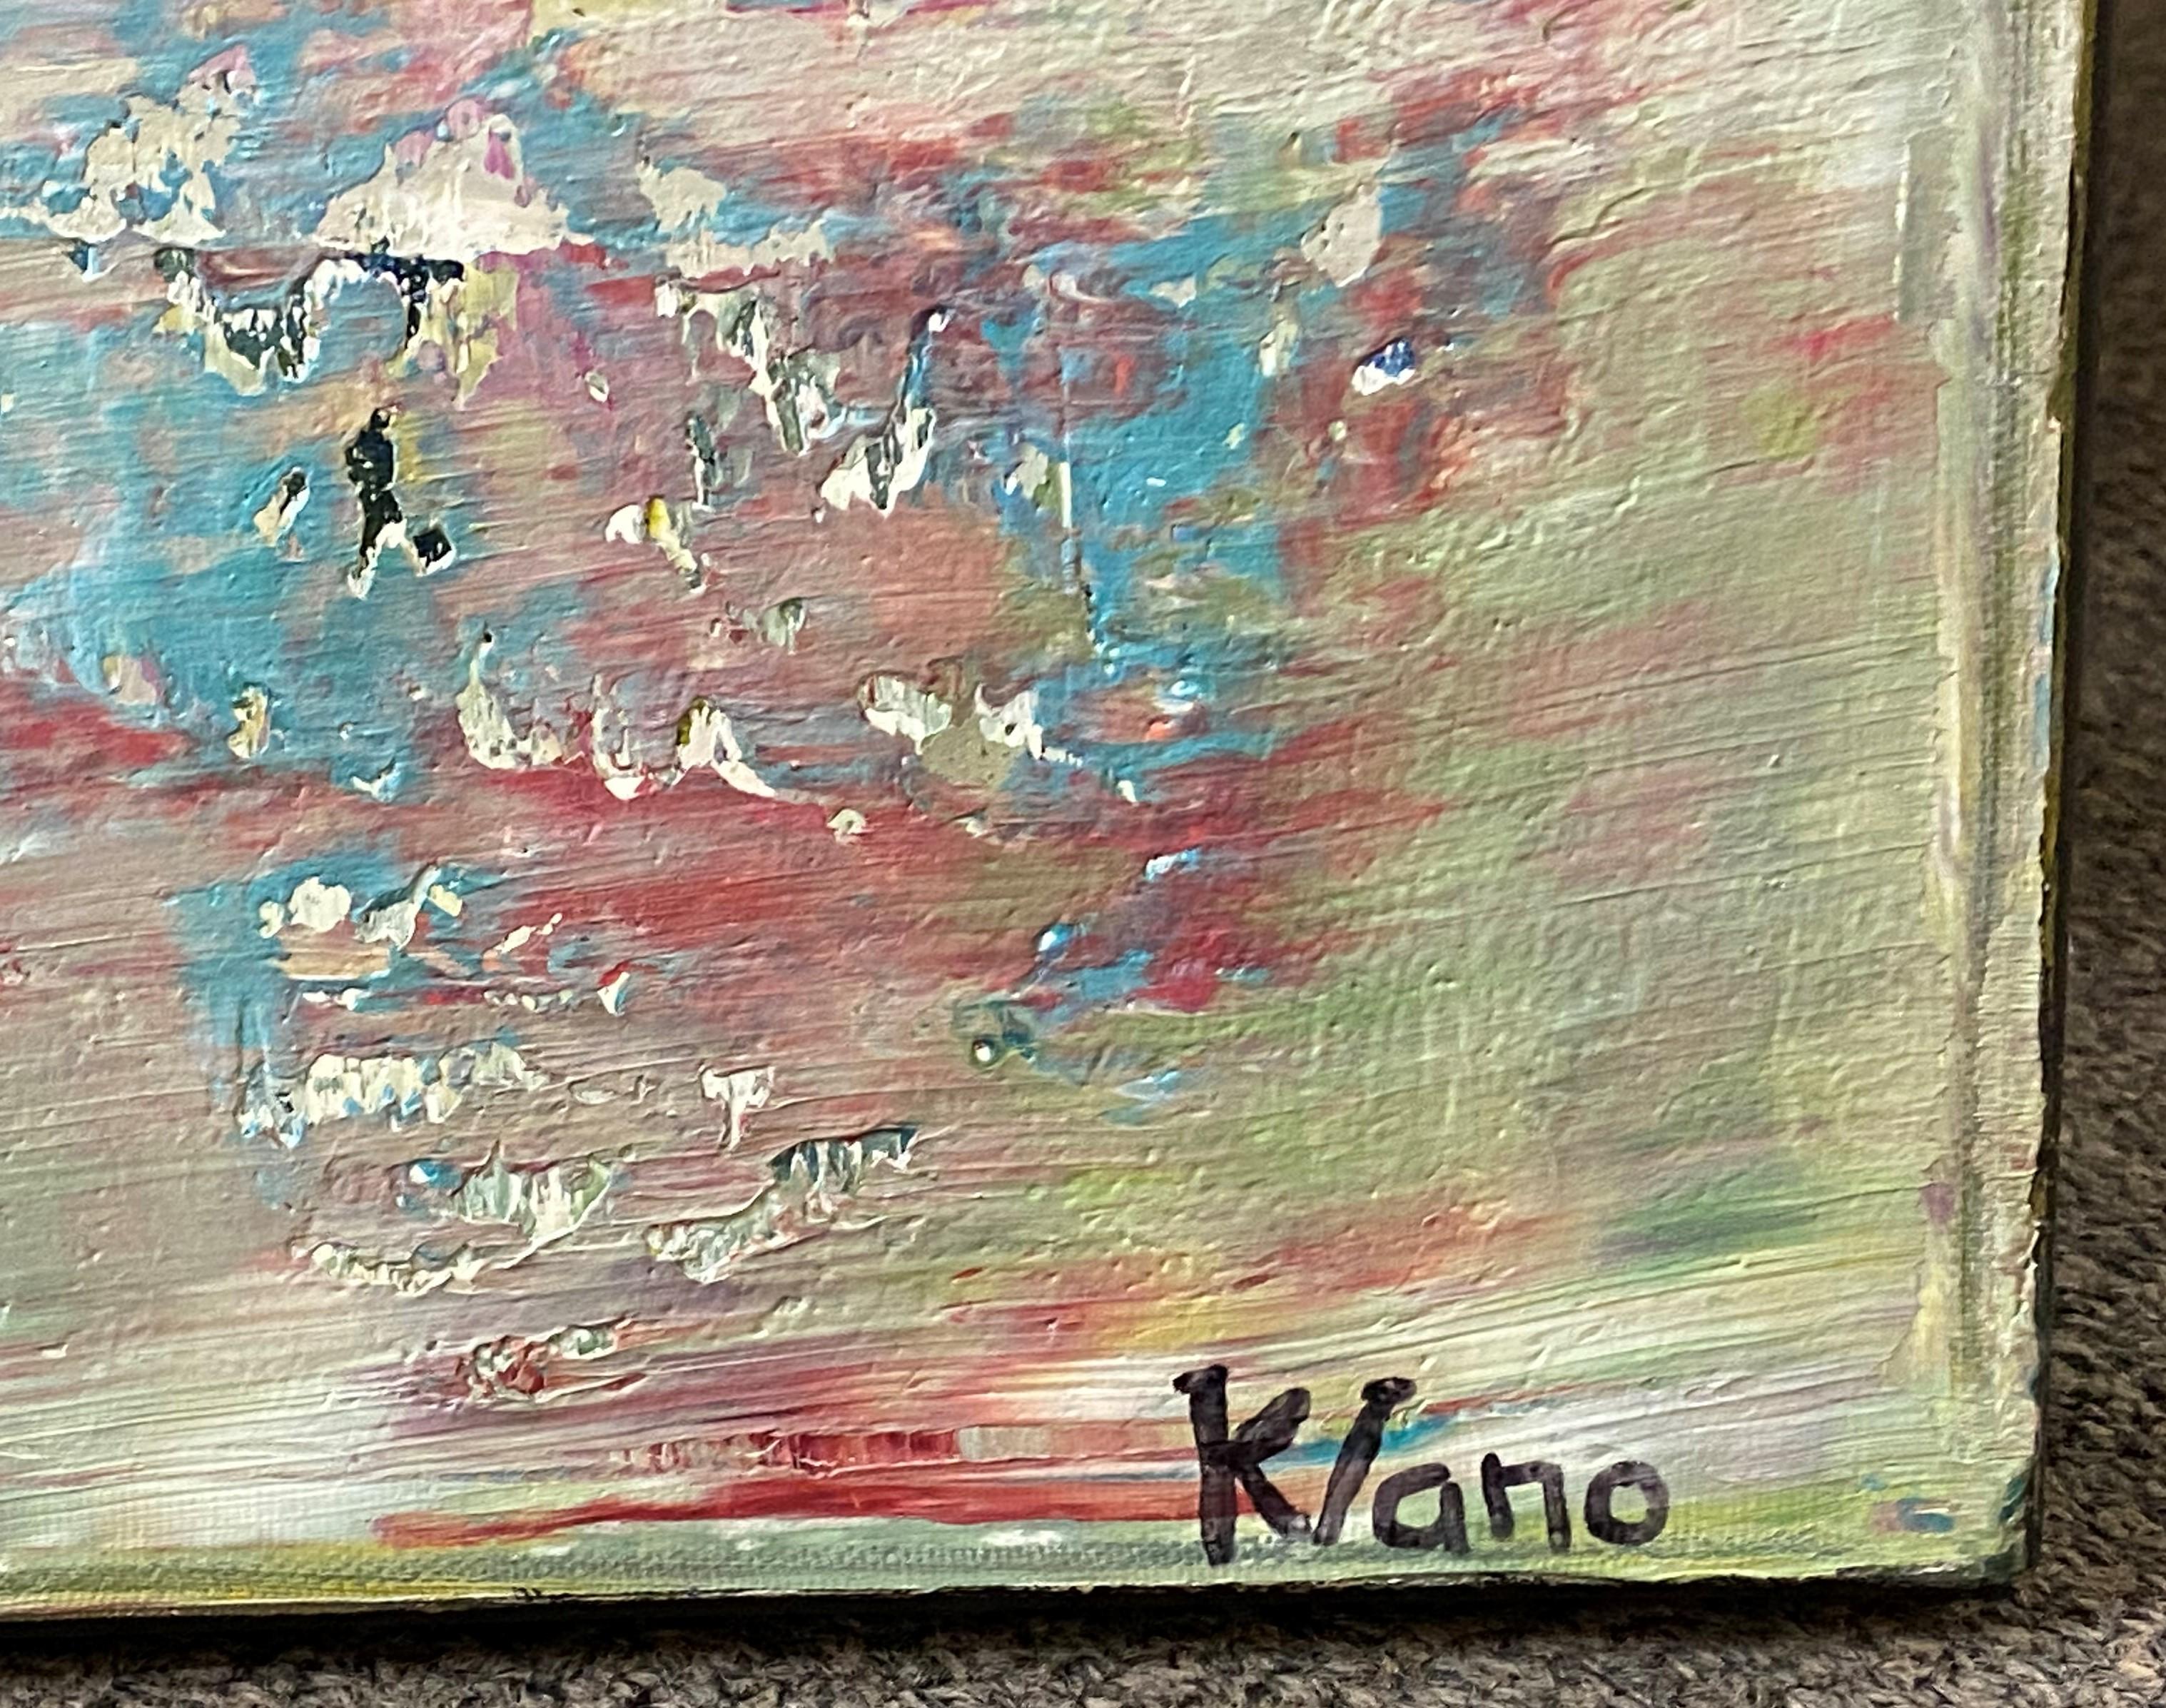 Nature - Abstract Expressionist Painting by Kloe Vano